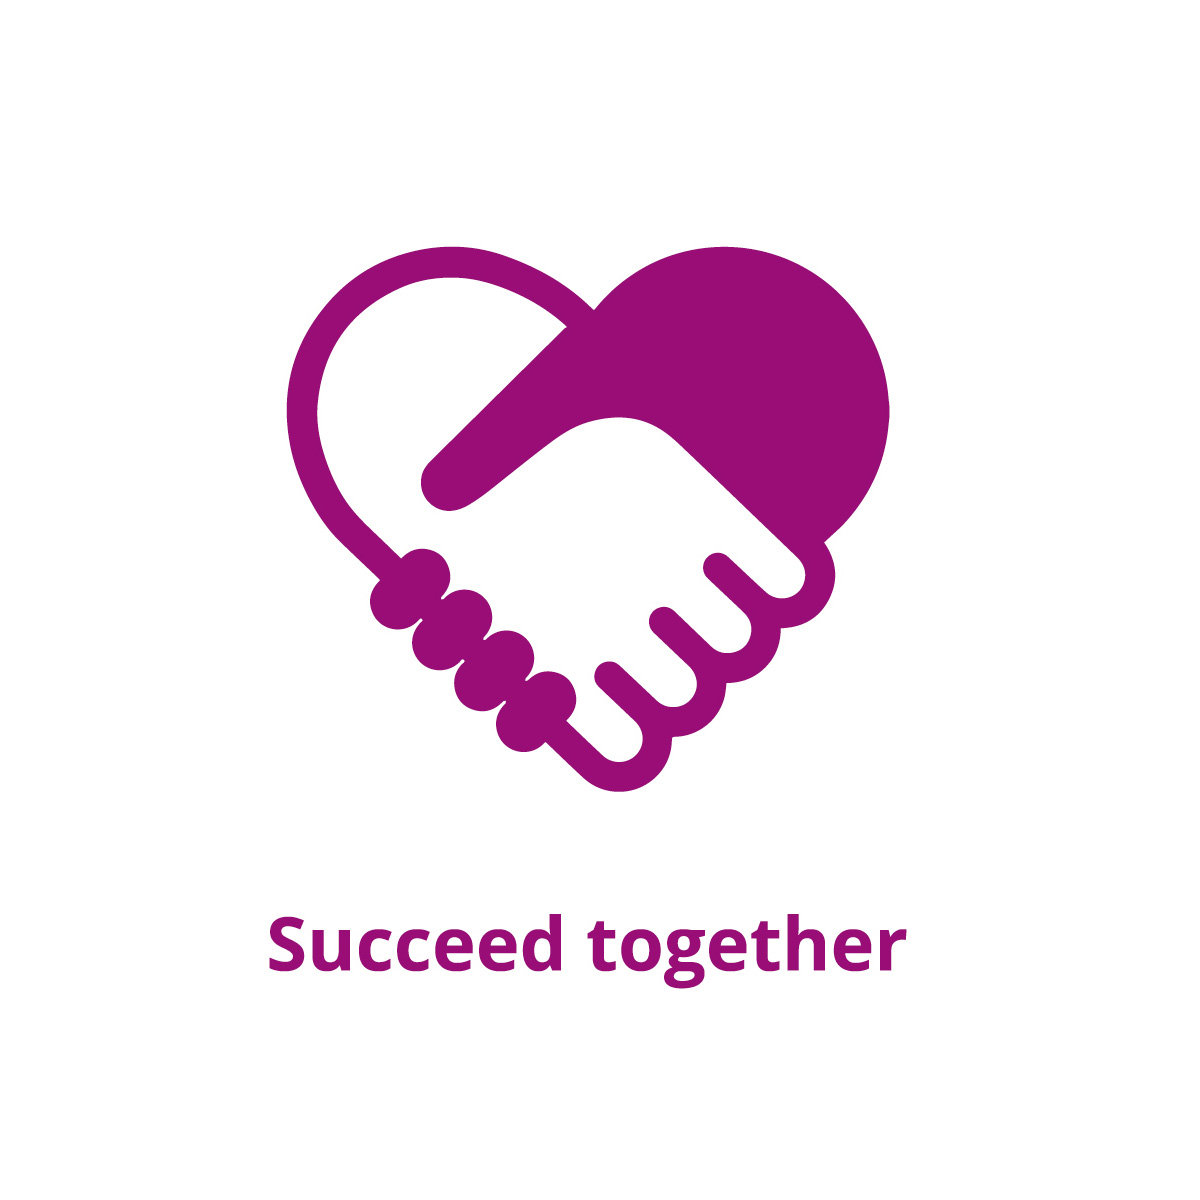 Succeed together